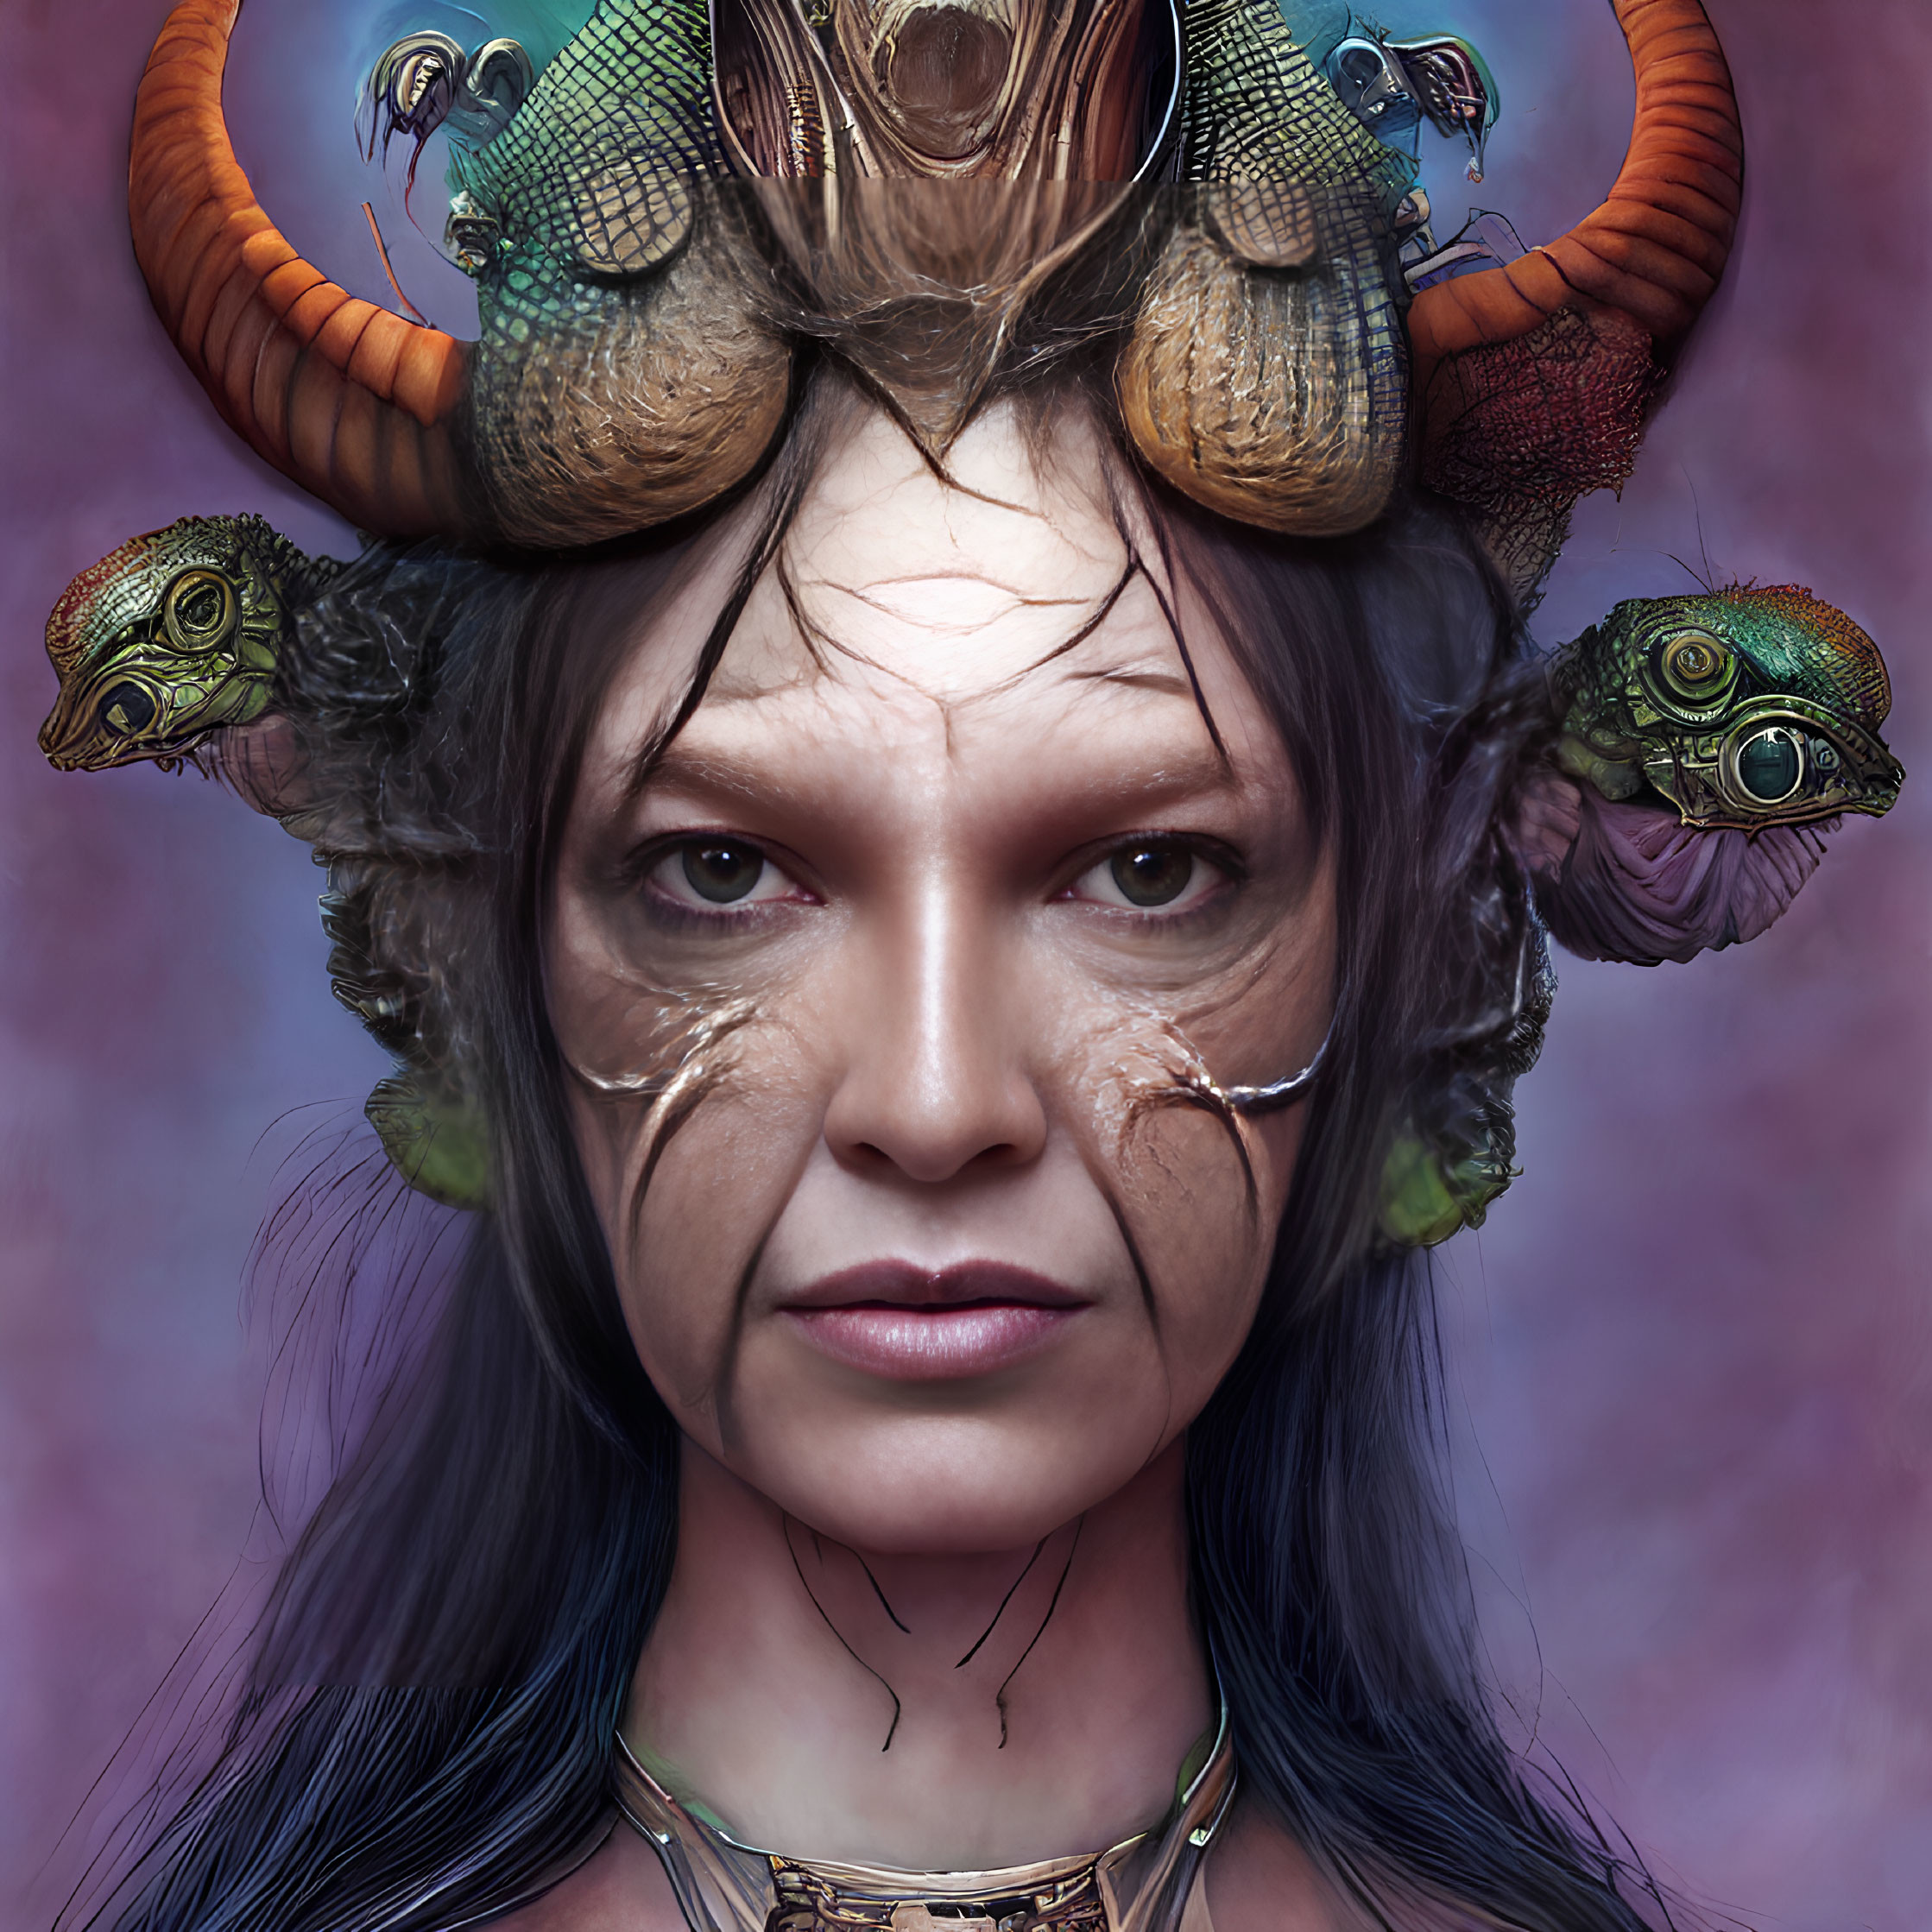 Fantasy-inspired headdress with horns and reptilian creatures on purple backdrop